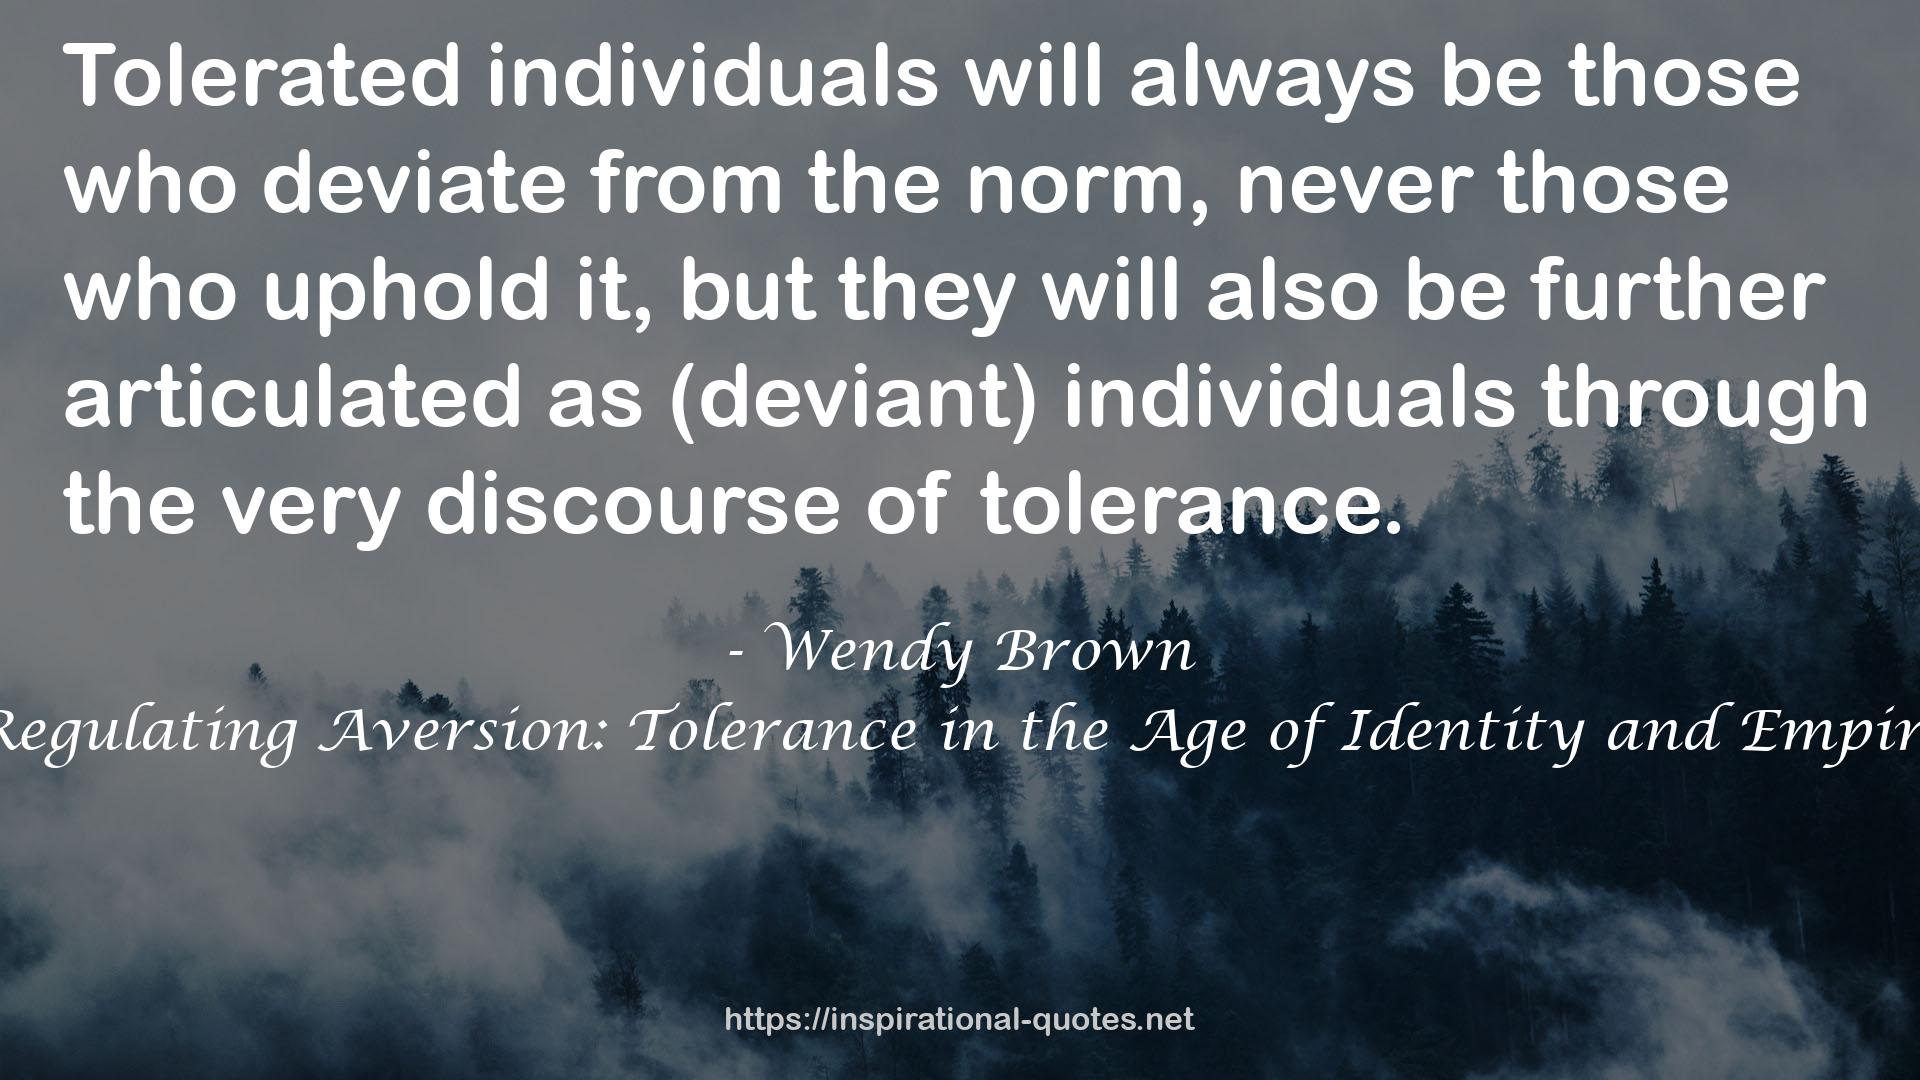 Regulating Aversion: Tolerance in the Age of Identity and Empire QUOTES